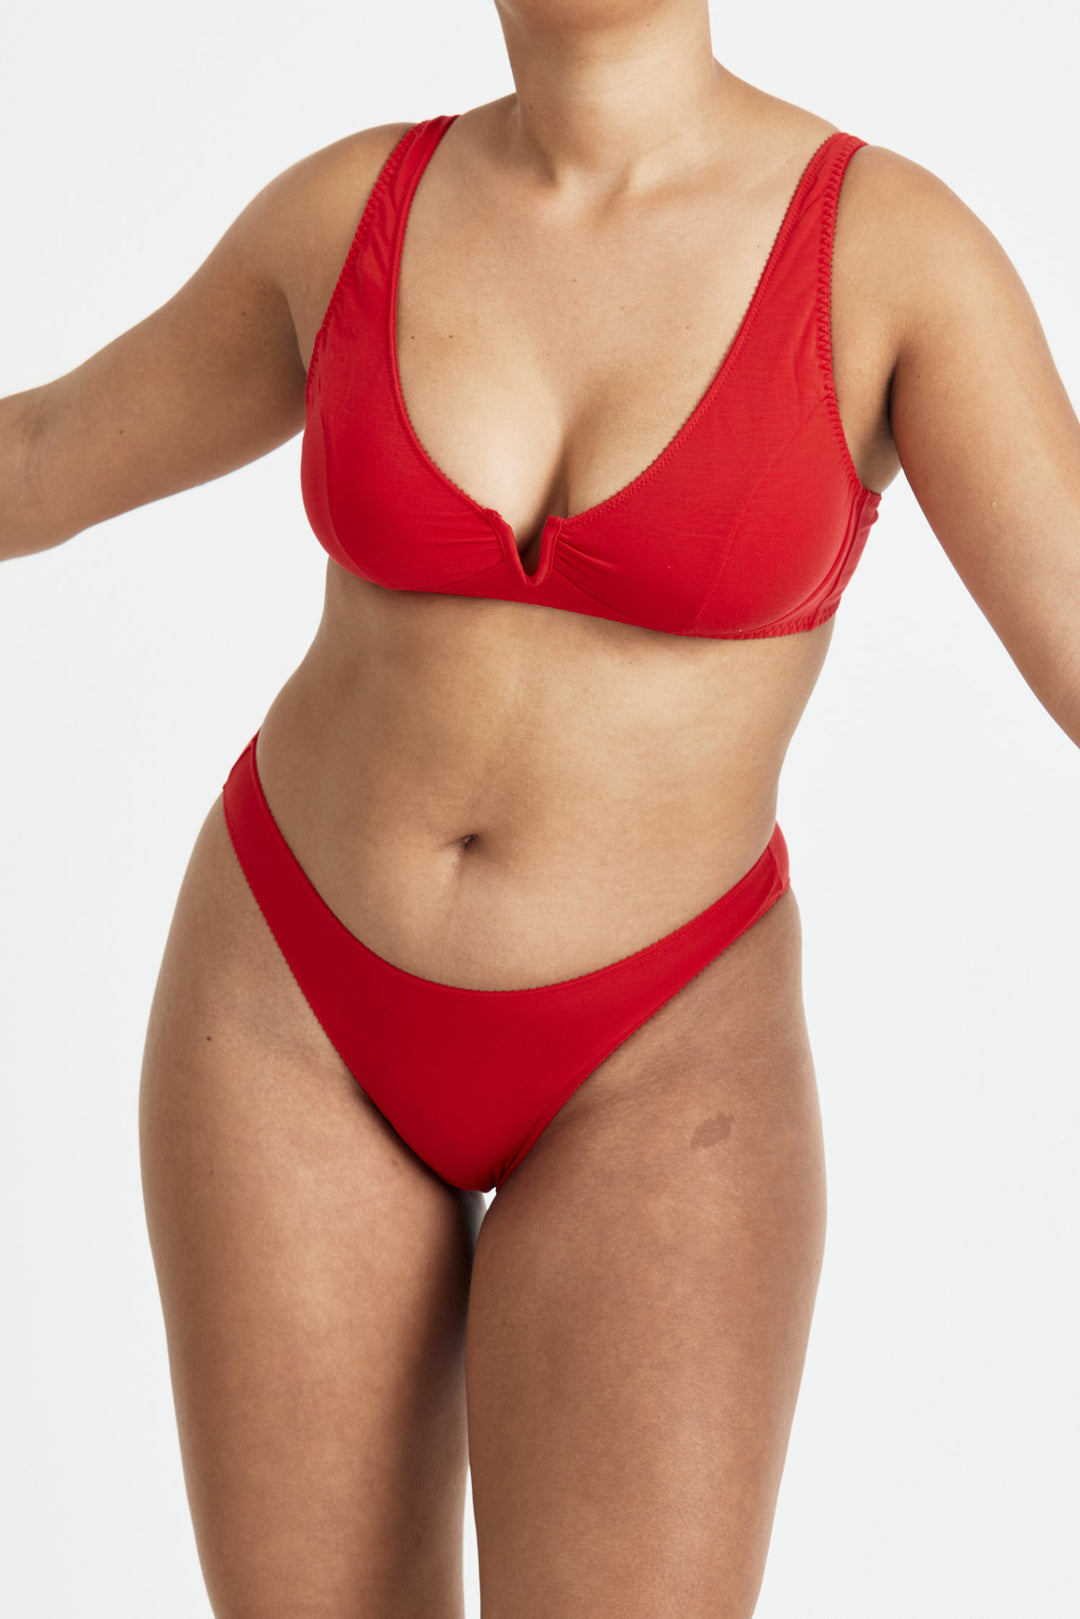 Videris Lingerie thong in red TENCEL™ a comfortable mid-rise style with wide sides and soft elastics